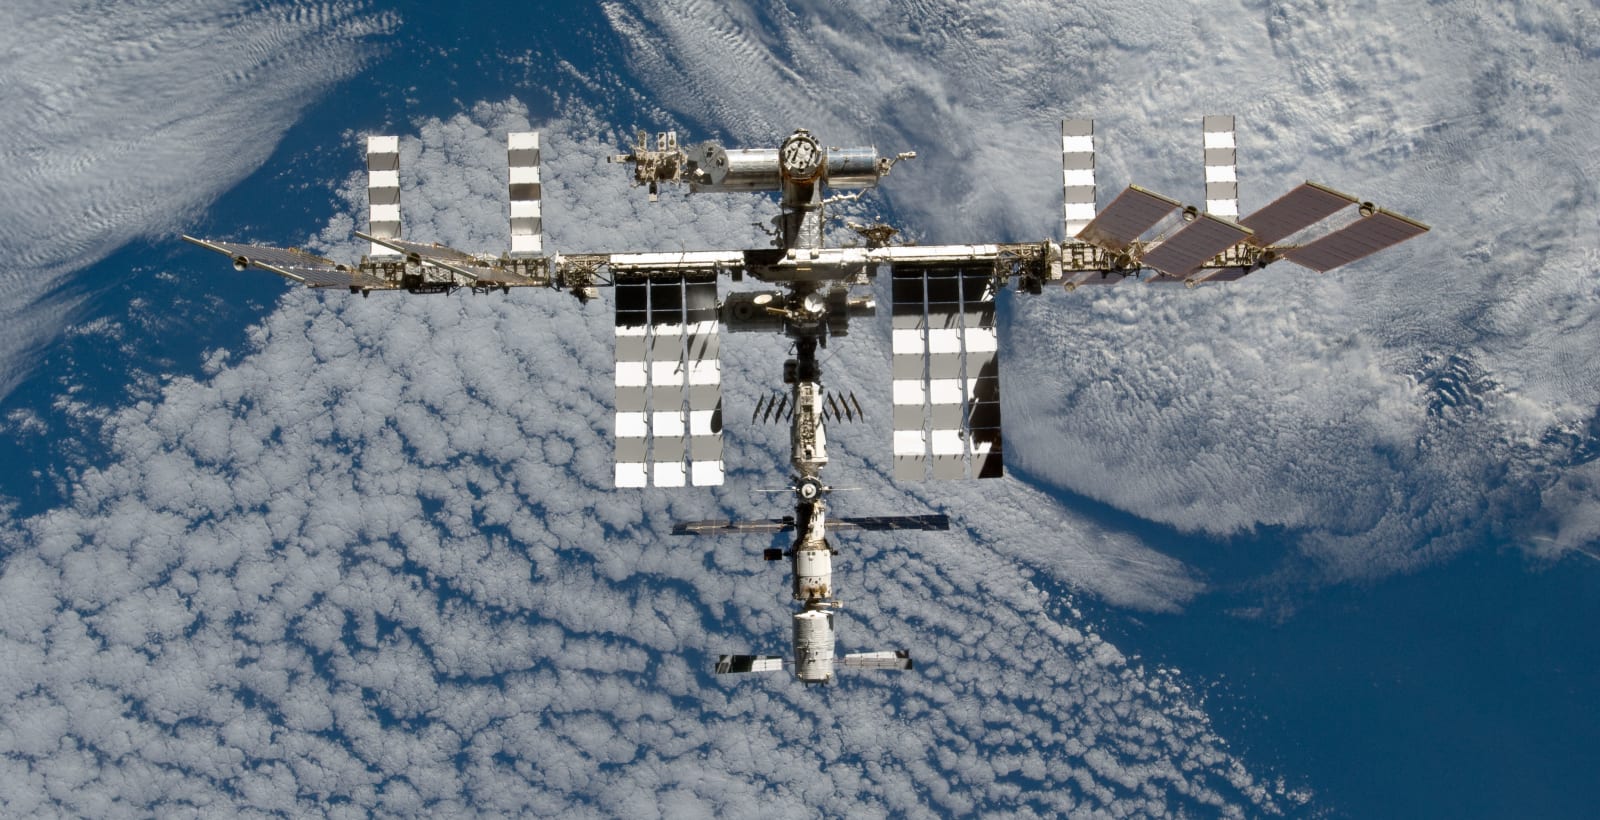 Space Station Over Earth (NASA, International Space Station, 03/07/11)